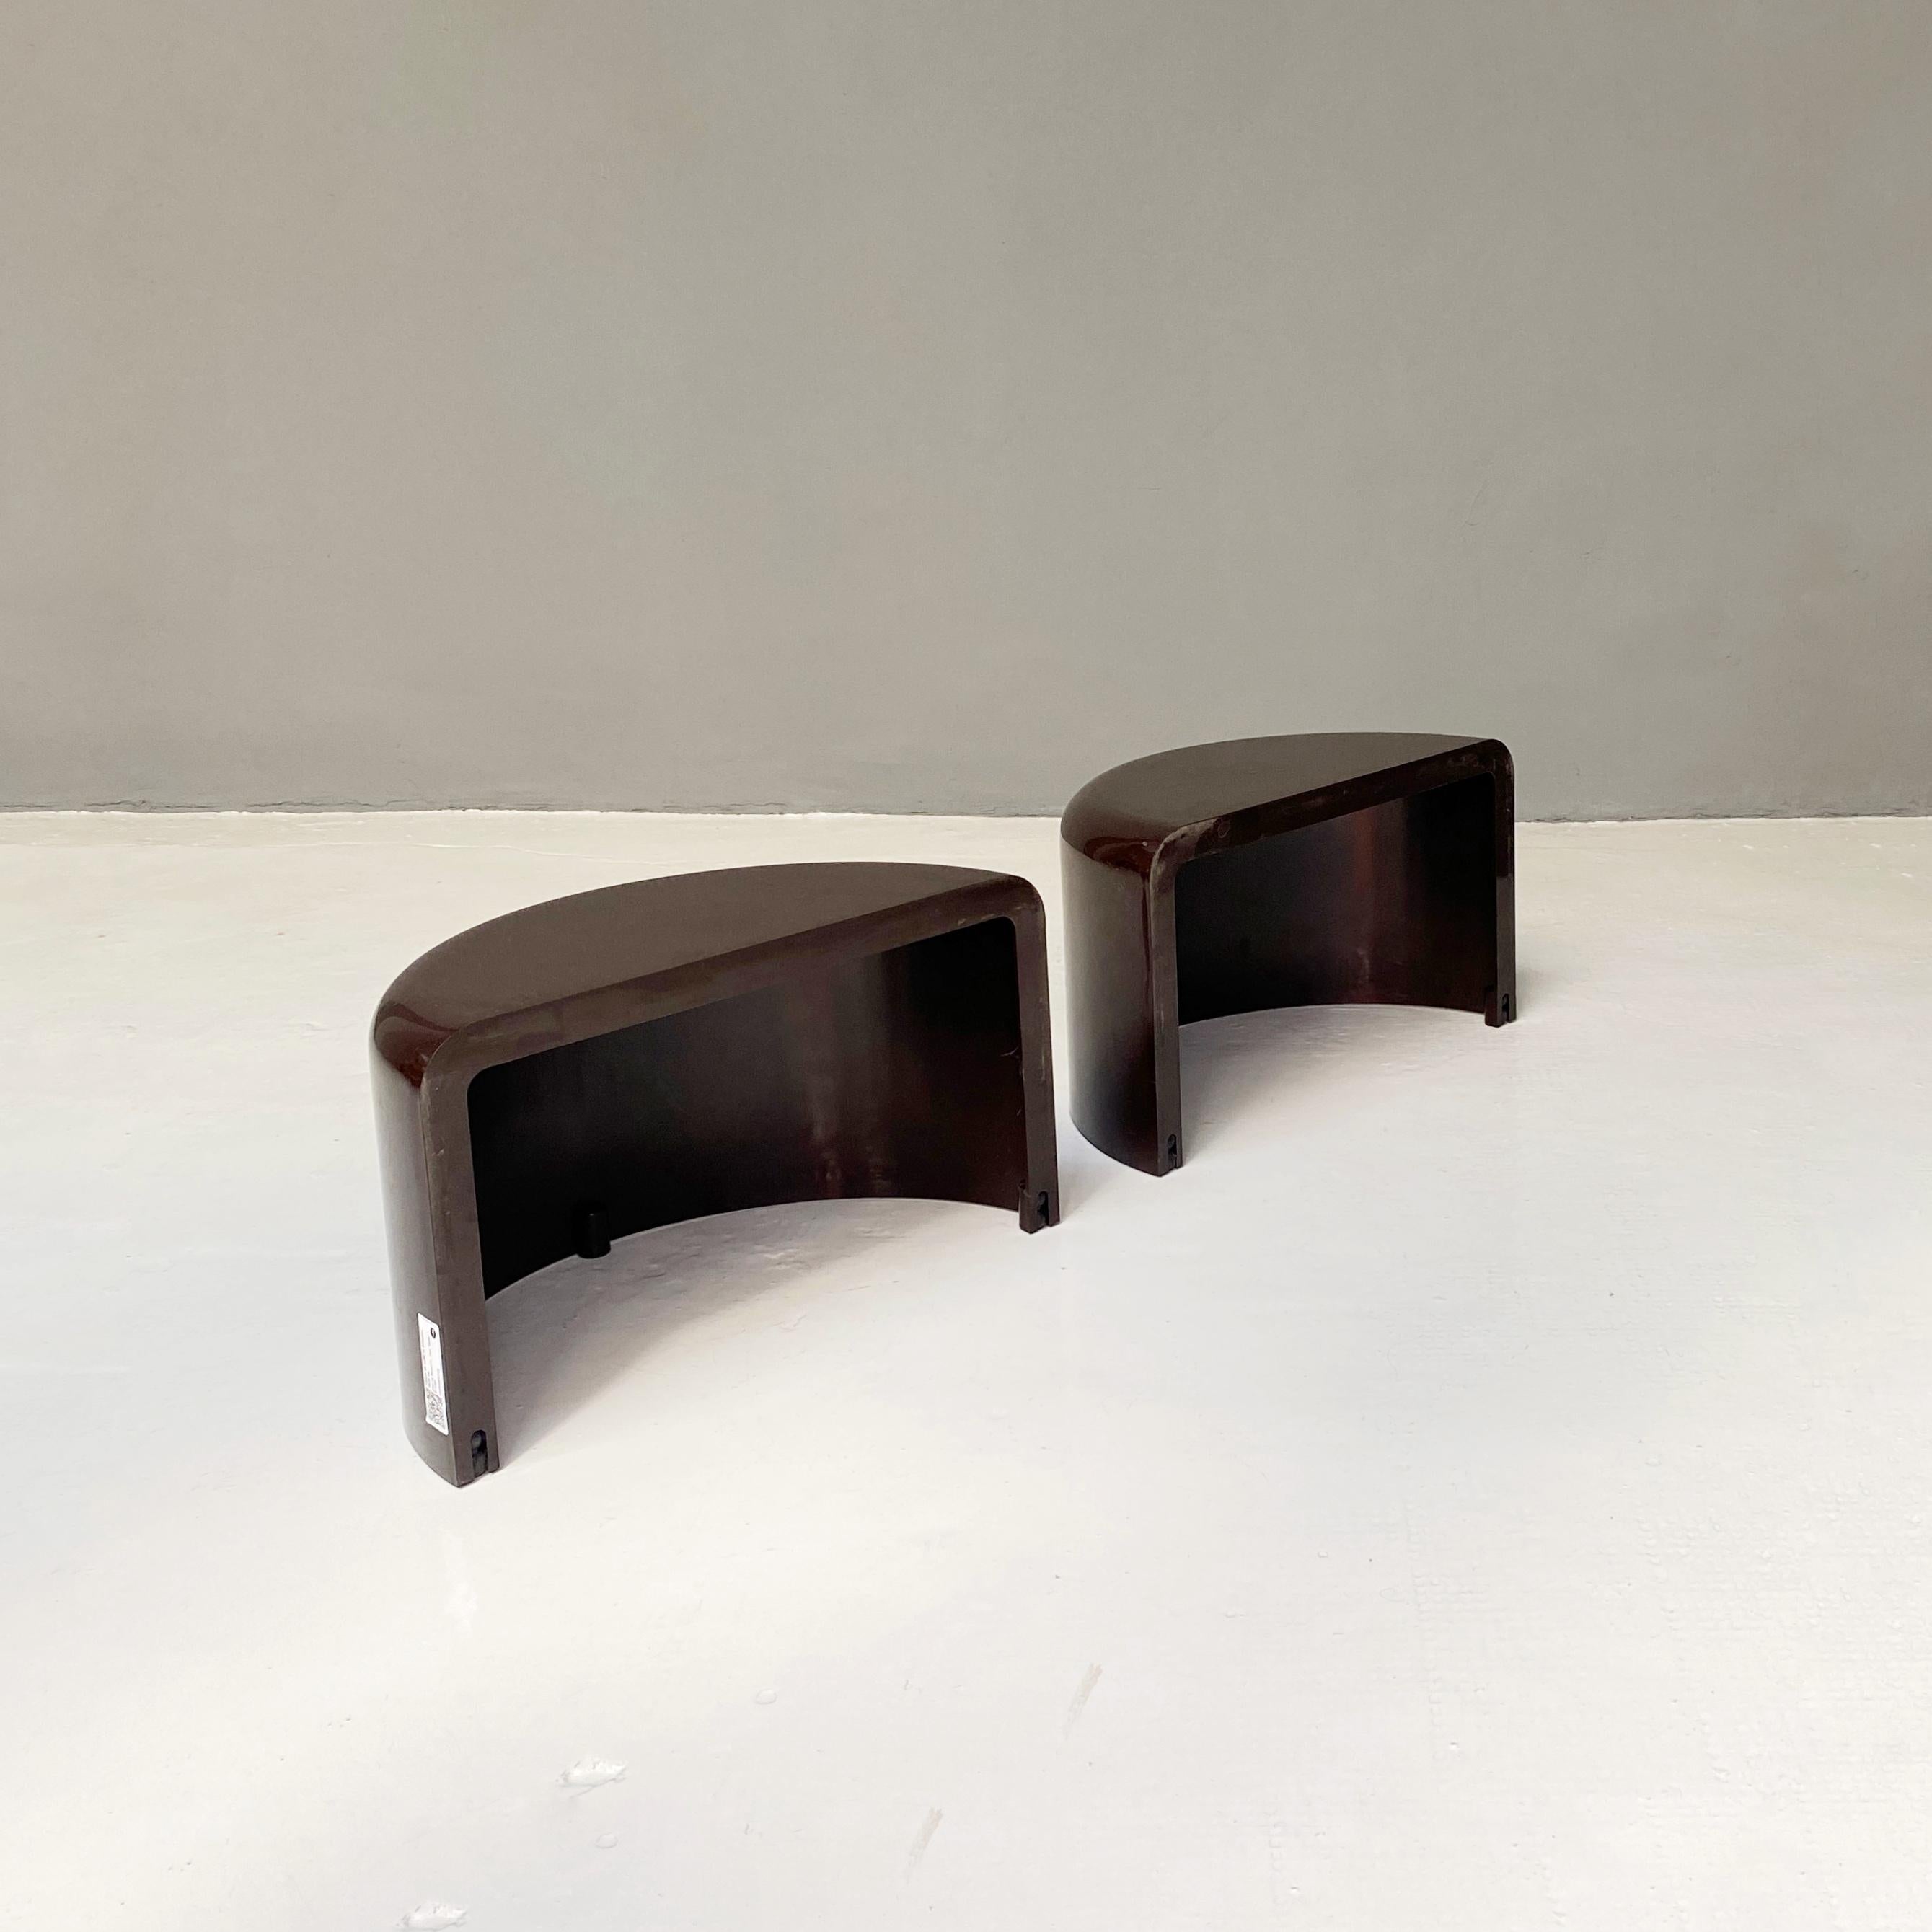 Modern Brown Plastic Table by Alberto Rosselli and Isao Hosoe for Bilumen, 1980s For Sale 8